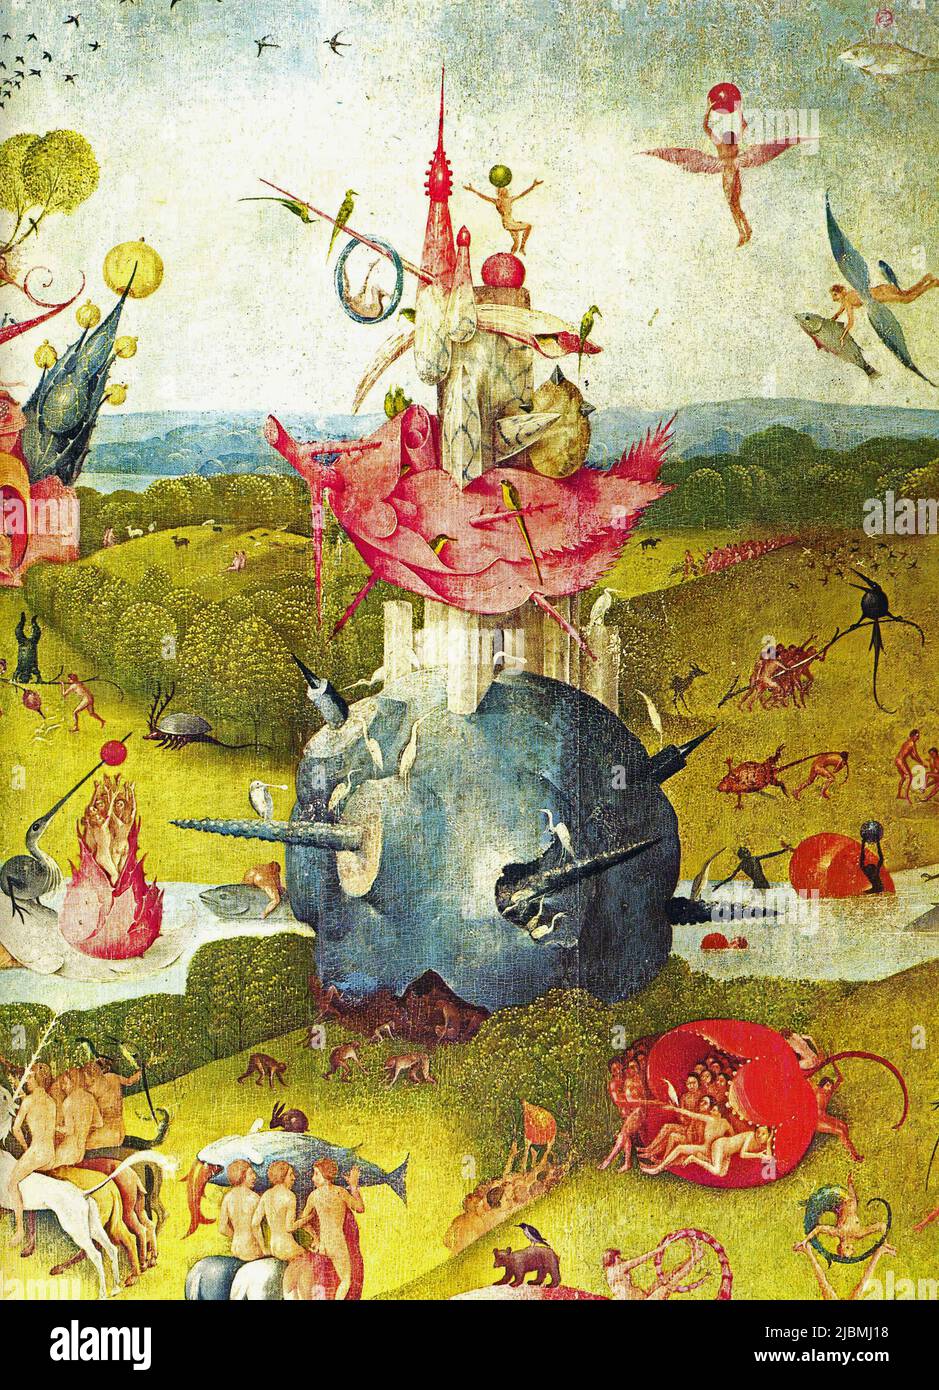 'The Garden of Earthly Delights'. Detail from central panel of triptych. Painting by Hieronymus Bosch. Madrid, Prado. Stock Photo